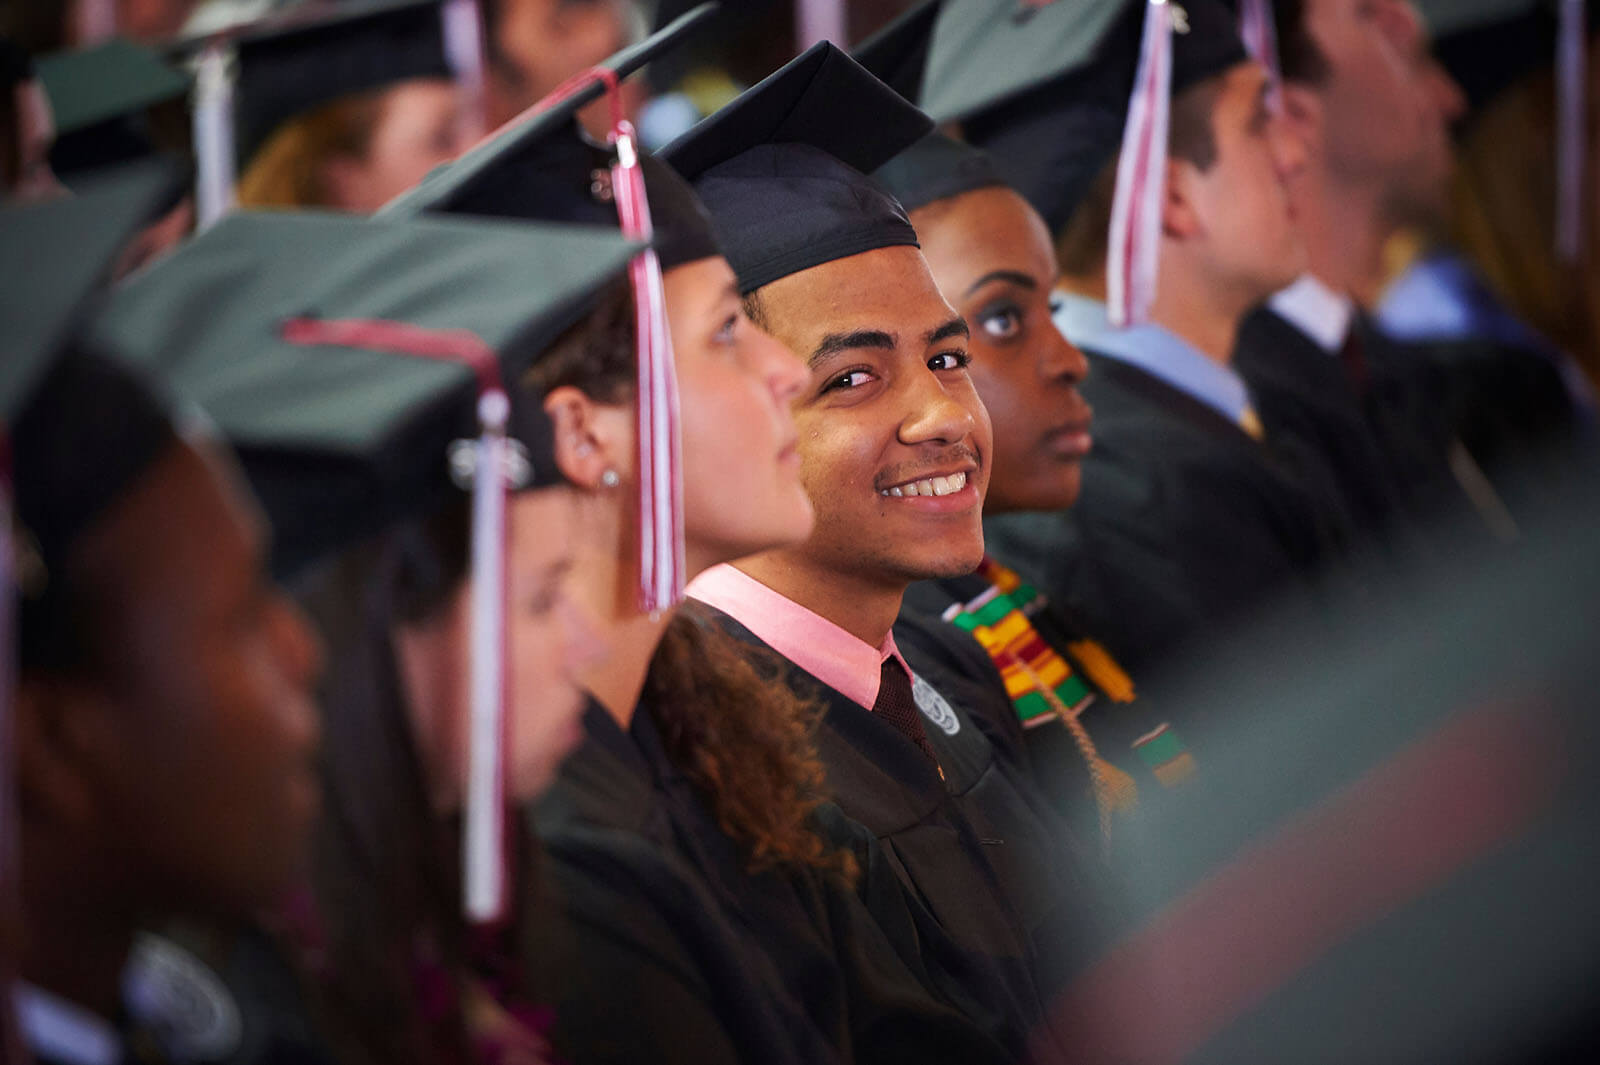 Student in cap and gown smiles cheekily at the camera